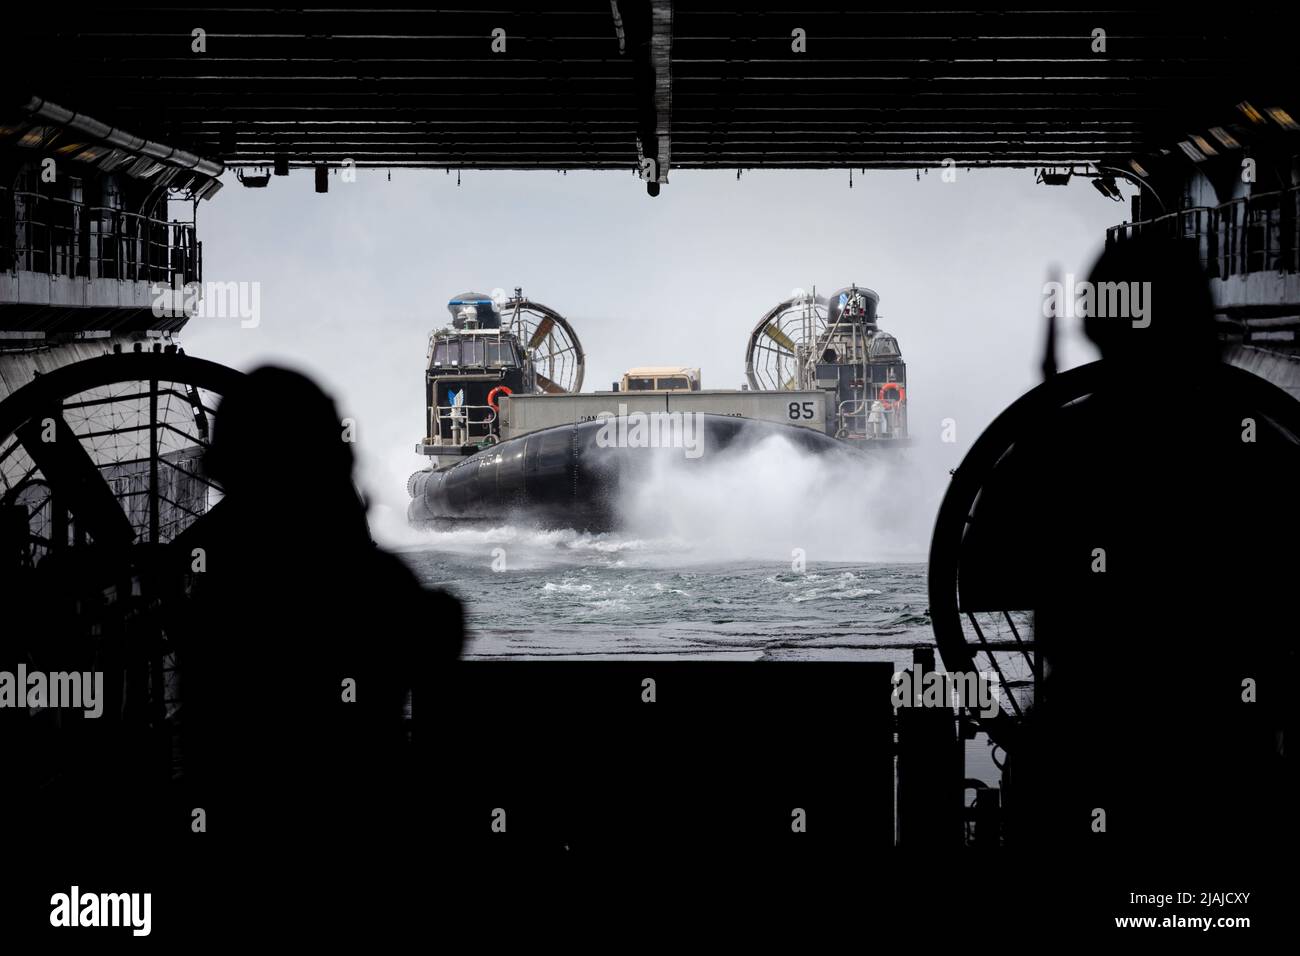 BALTIC SEA (May 21, 2022) – Landing Craft, Air Cushion 85, attached to Assault Craft Unit 4, approaches the well deck of the Wasp-class amphibious assault ship USS Kearsarge (LHD 3) May 21, 2022. Kearsarge, flagship of the Kearsarge Amphibious Ready Group and embarked 22nd Marine Expeditionary Unit, is participating in the Estonian-led exercise Siil 22 (Hedgehog 22 in English). Hedgehog 22 brings together members of the Estonian Defense Force and U.S. Sailors and Marines under Task Force 61/2 to enhance Allied interoperability and preserve security and stability in the Baltic region. (U.S. Nav Stock Photo